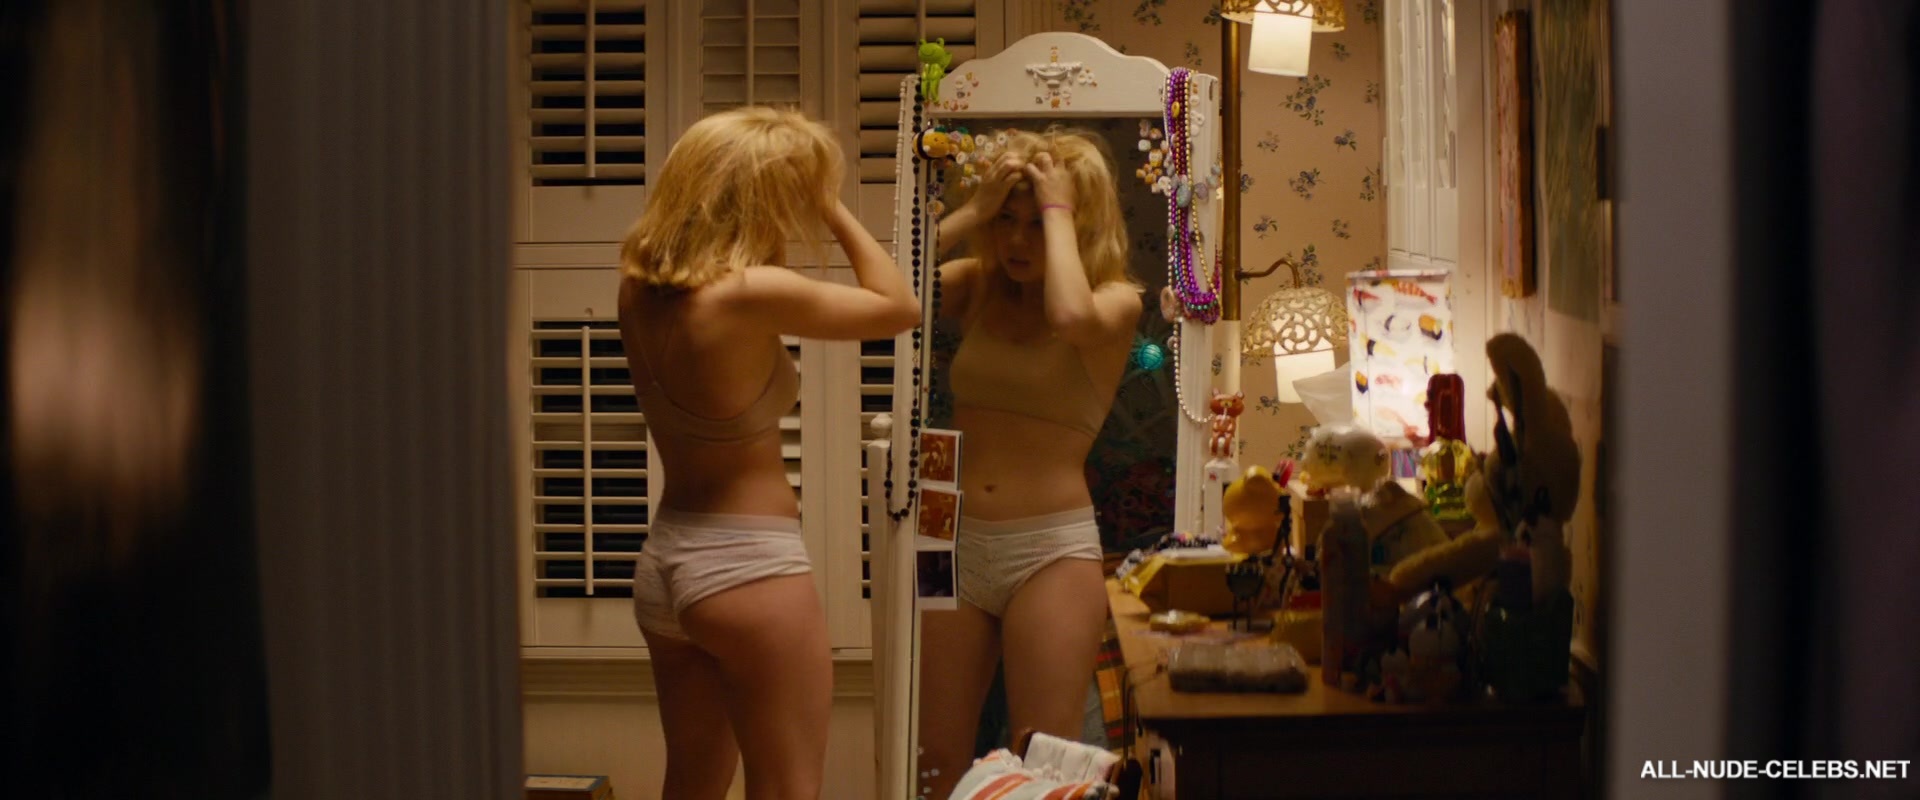 Jennette McCurdy sexy lingerie movie scenes.